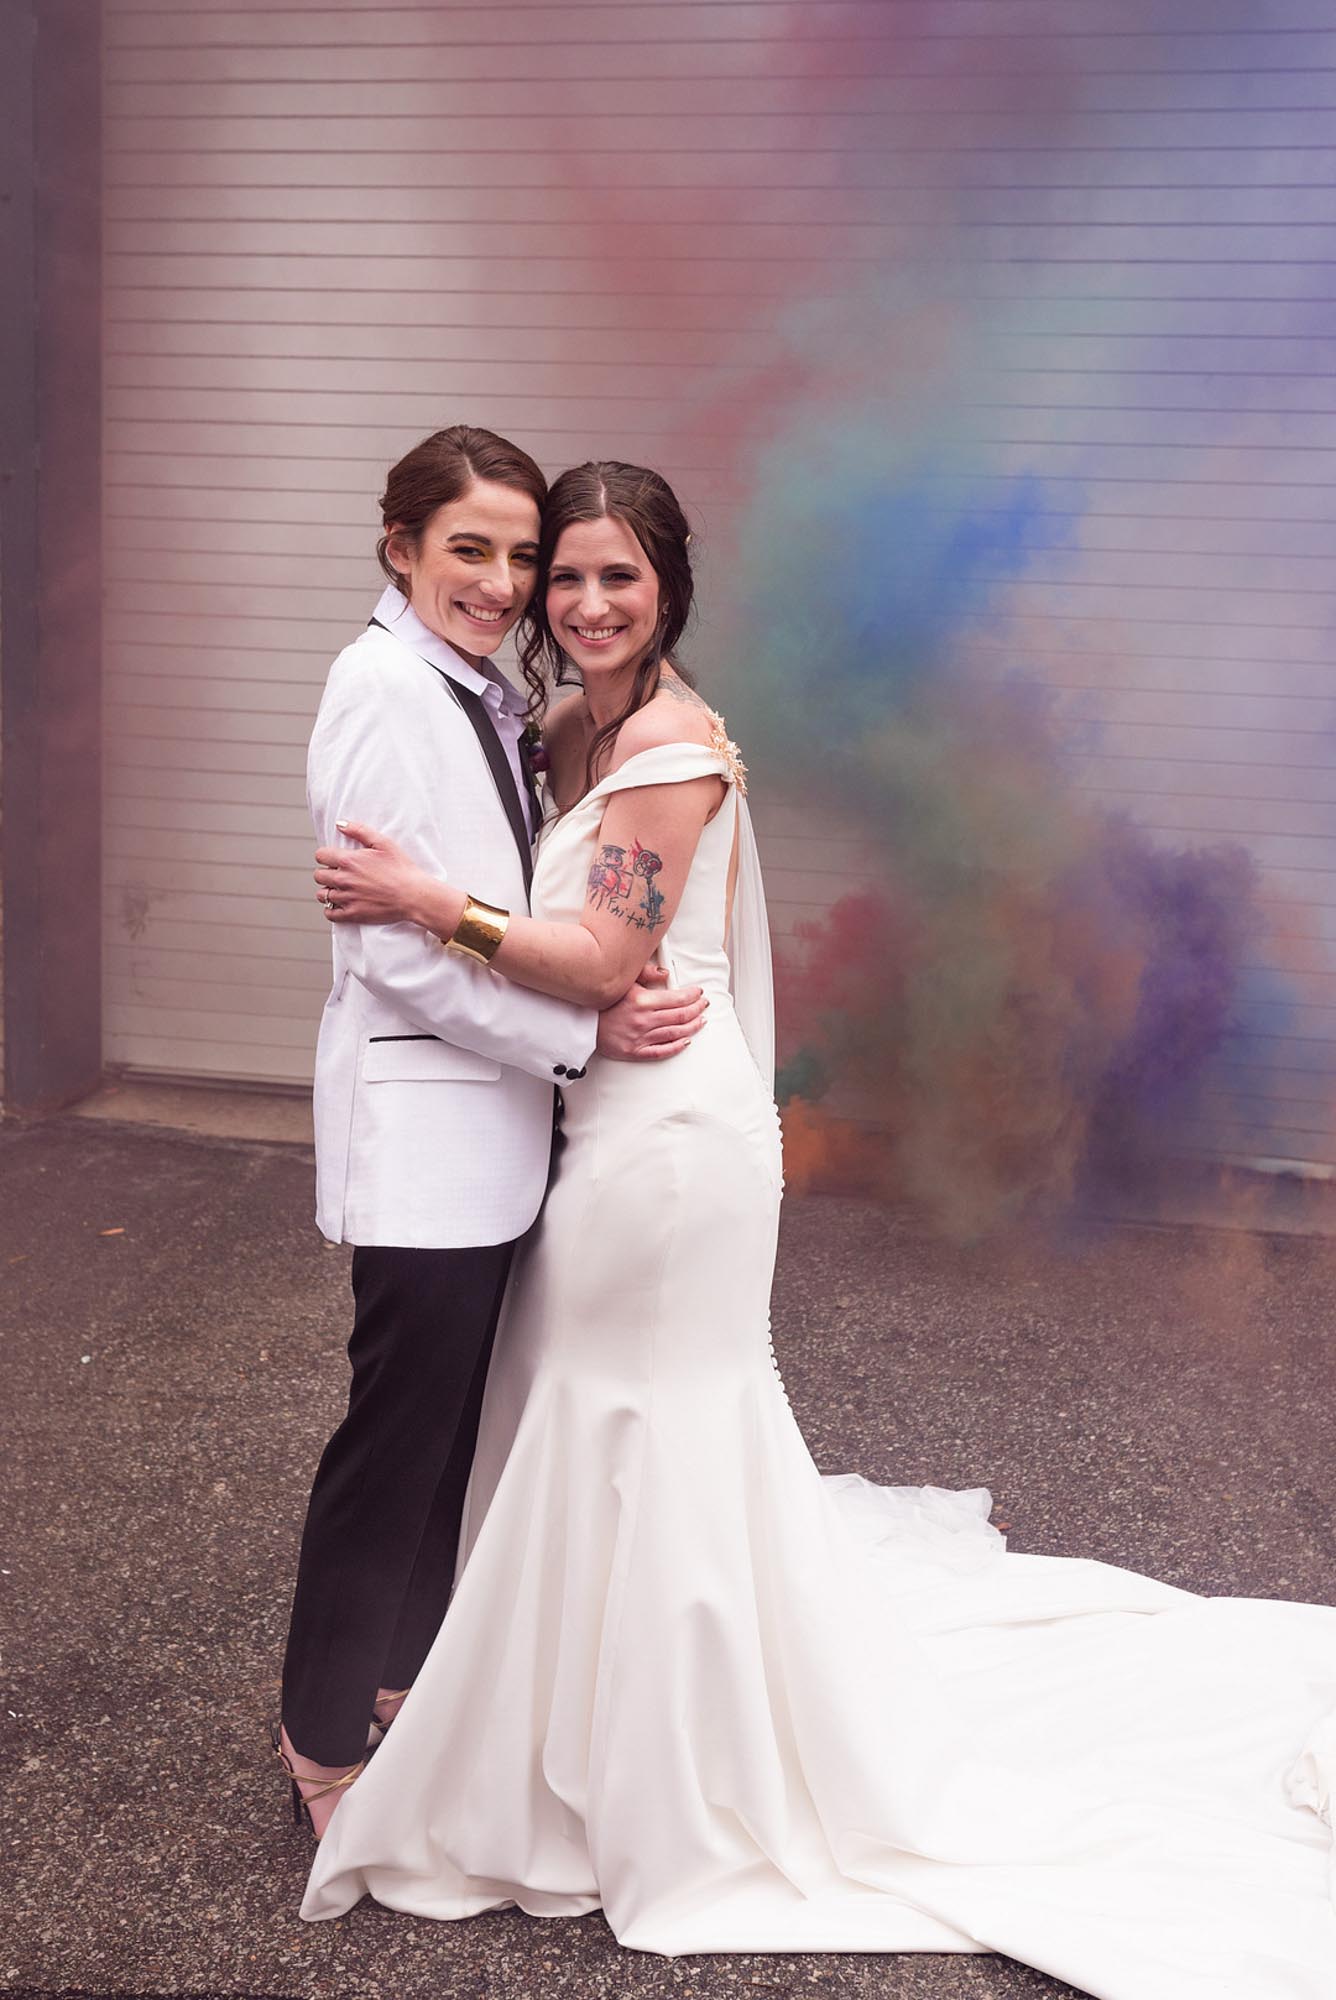 Bold and Colorful Wonder Woman-inspired Wedding Ideas | Alisha Faith Photography | Featured on Equally Wed, the leading LGBTQ+ wedding magazine 